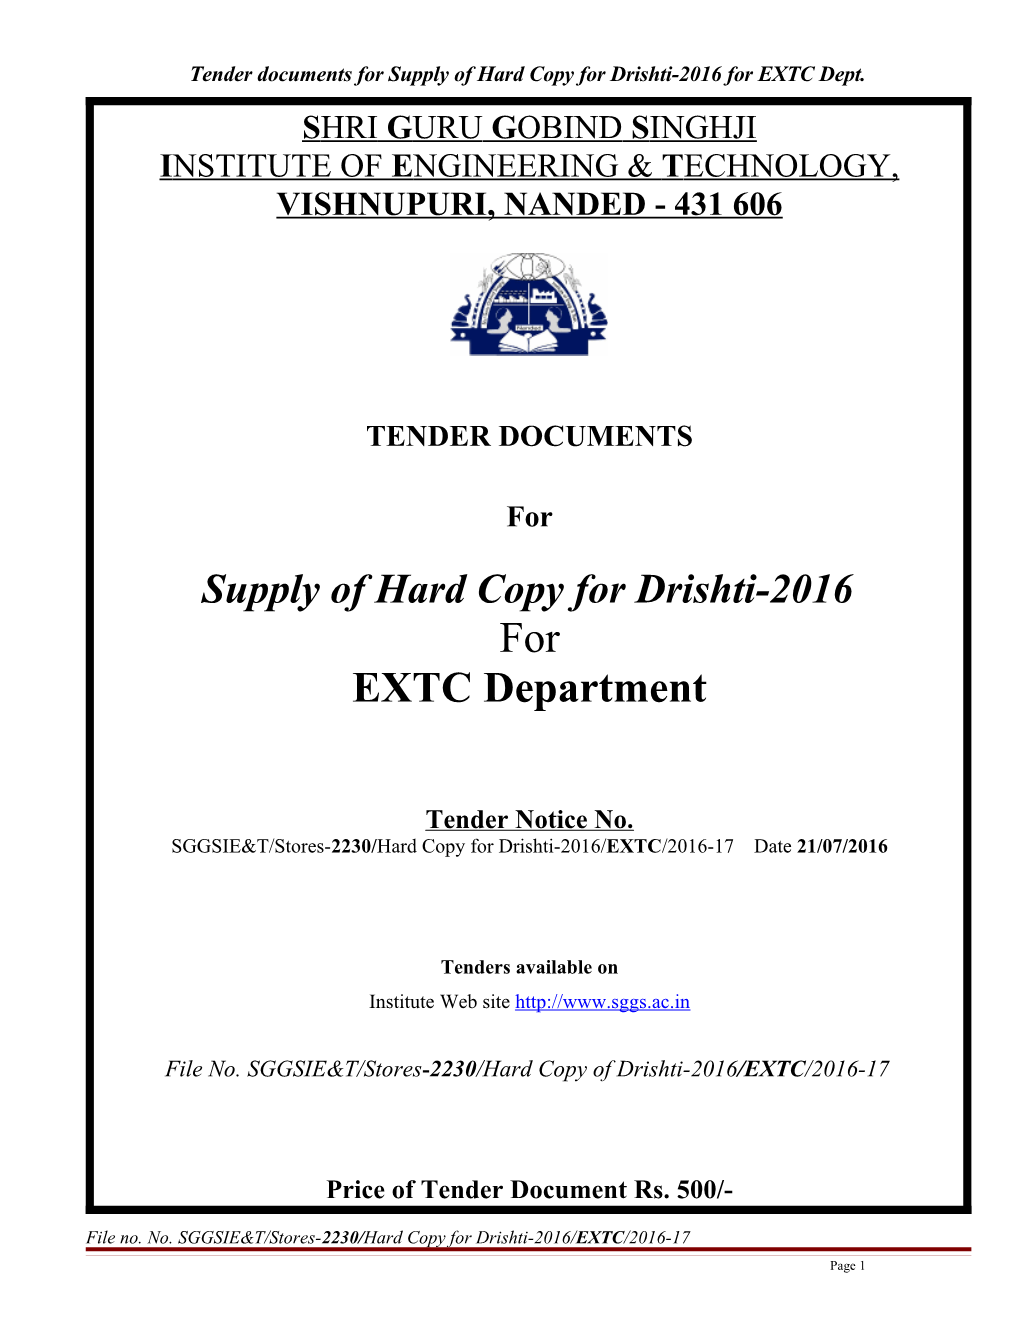 Tender Documents for Supply of Hard Copy for Drishti-2016For EXTC Dept